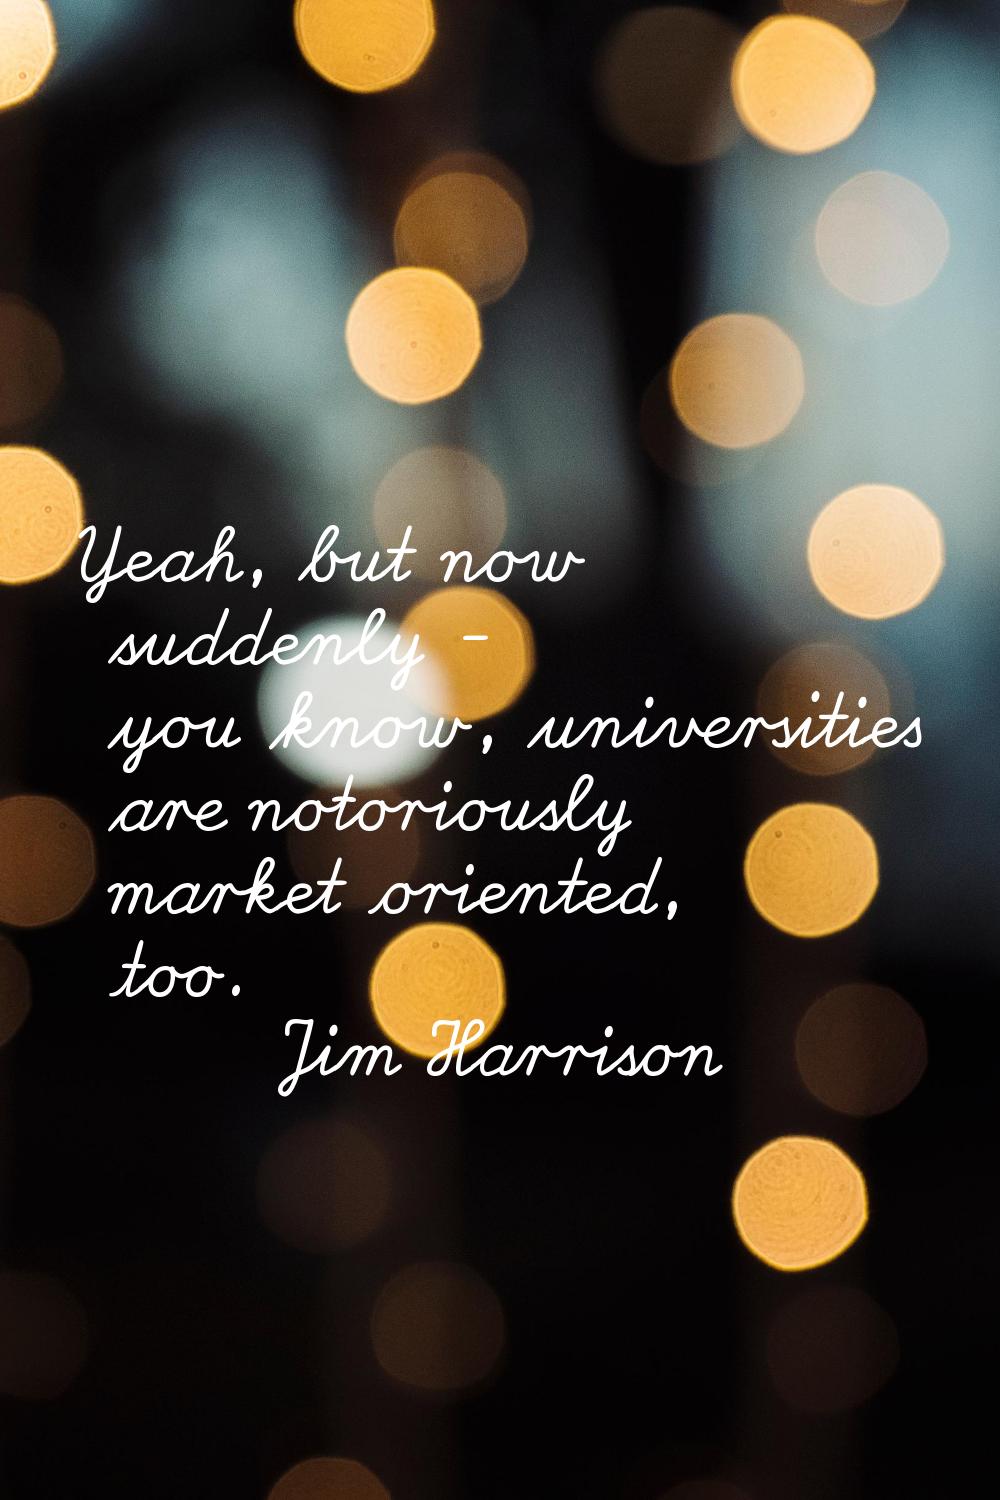 Yeah, but now suddenly - you know, universities are notoriously market oriented, too.